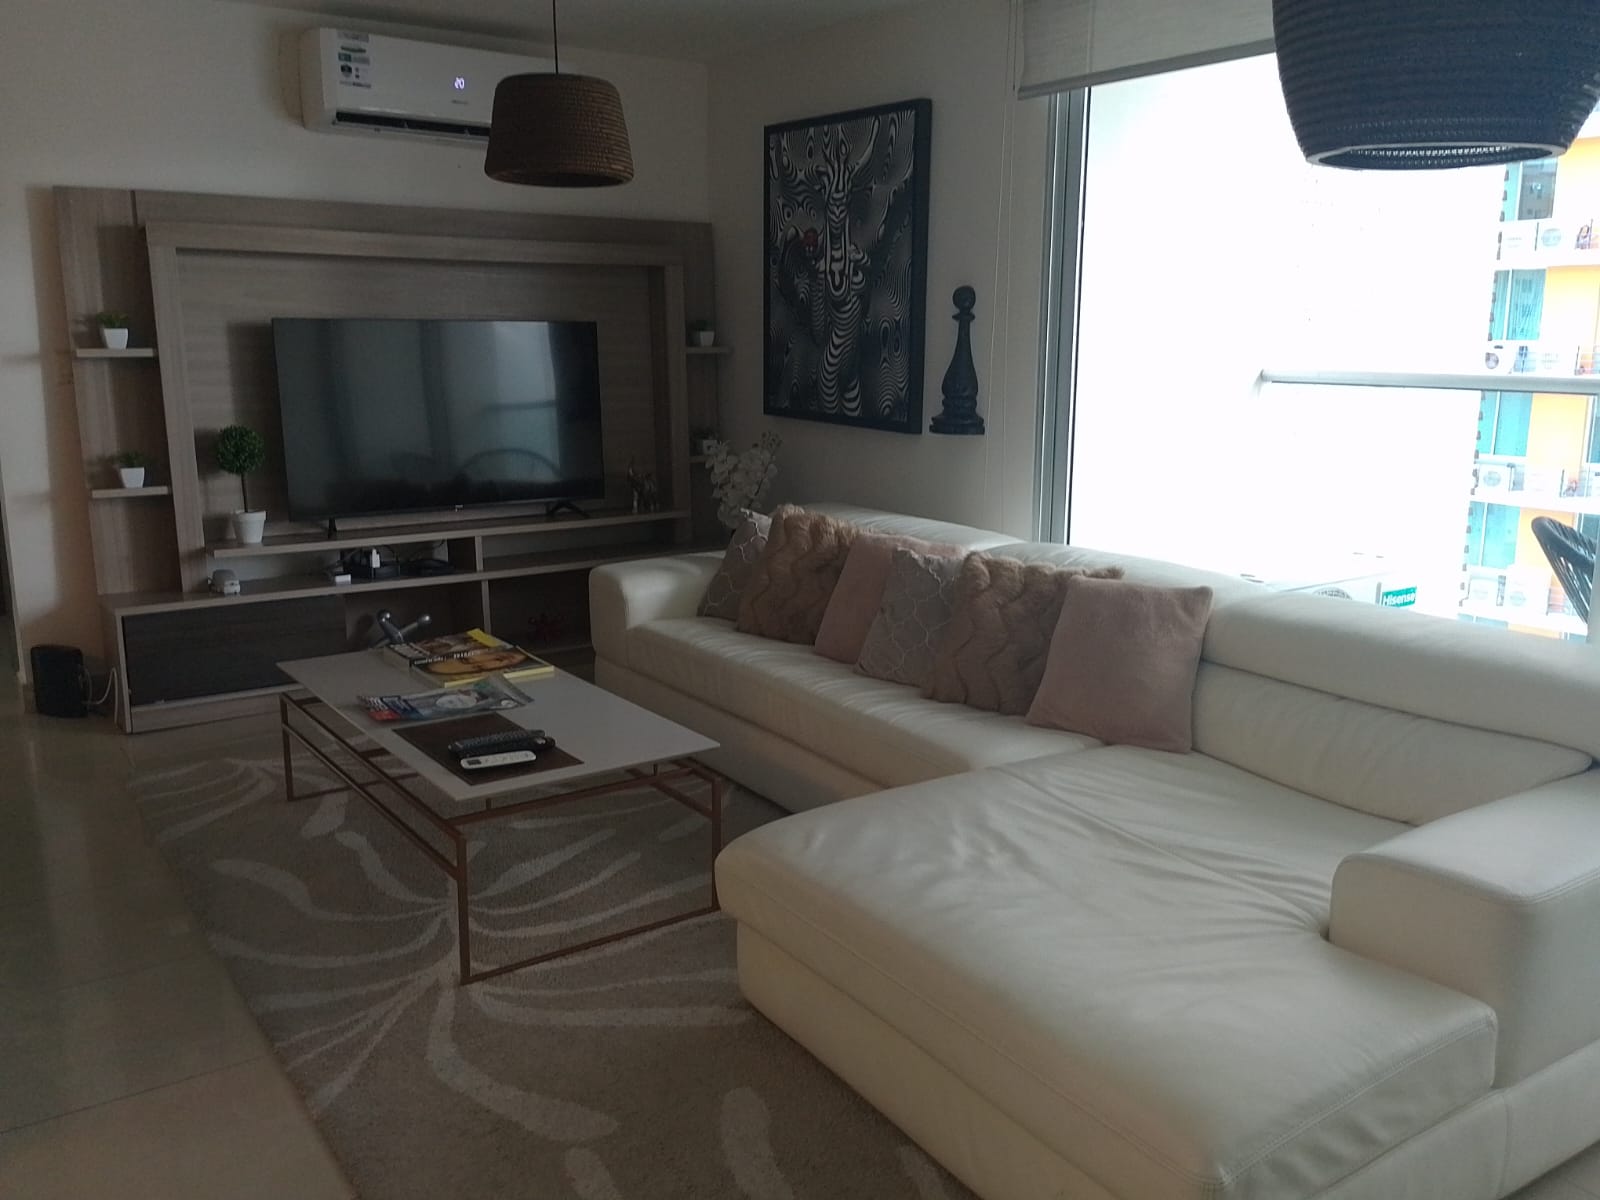 Turn-Key 139 sqm Apartment in PH Pijao, Costa del Este - PLS-19932 | Fully Furnished with Modern Amenities